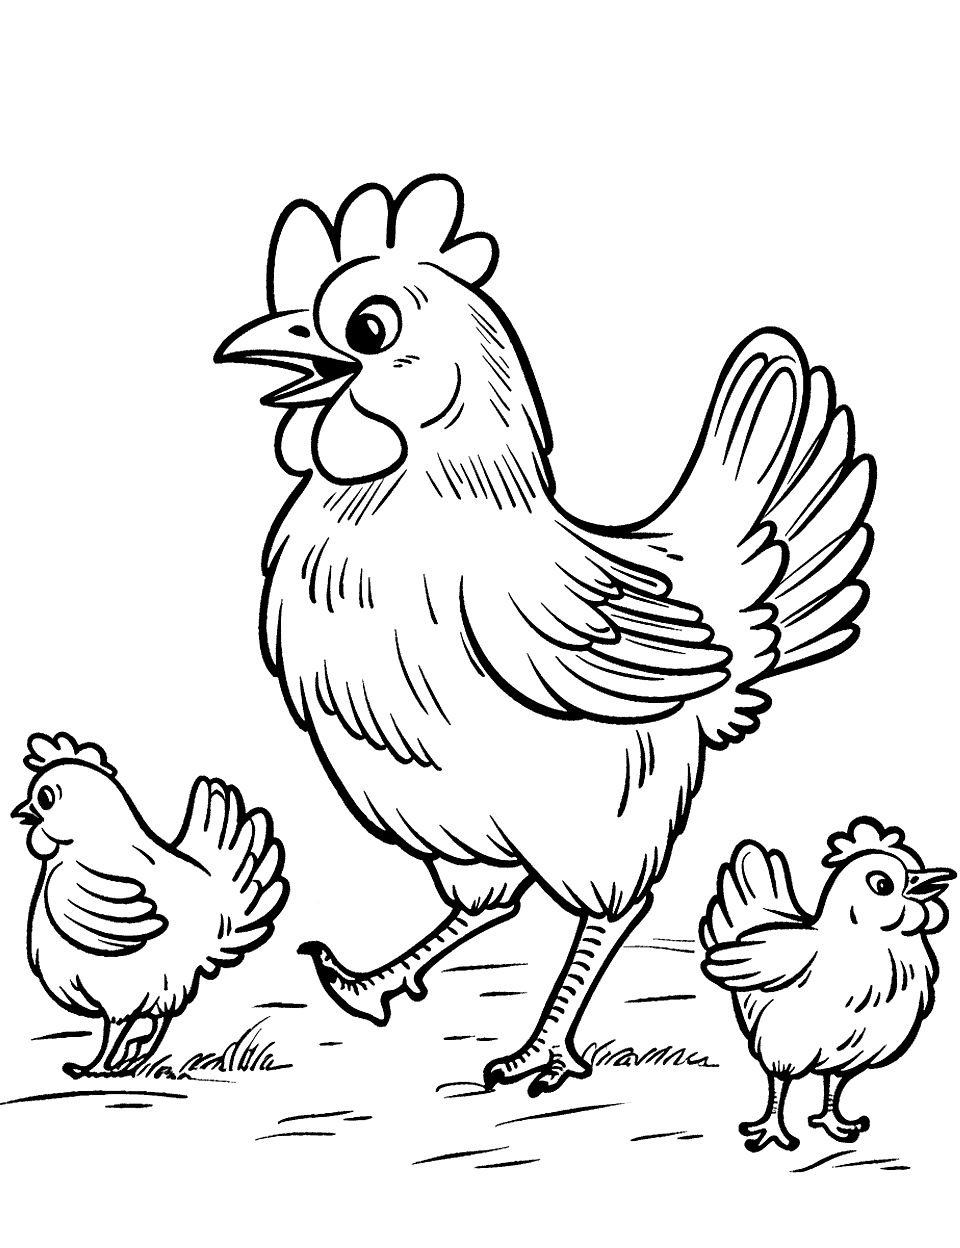 Dancing Chicken and Chicks Coloring Page - A joyful scene with a chicken and her chicks dancing together.